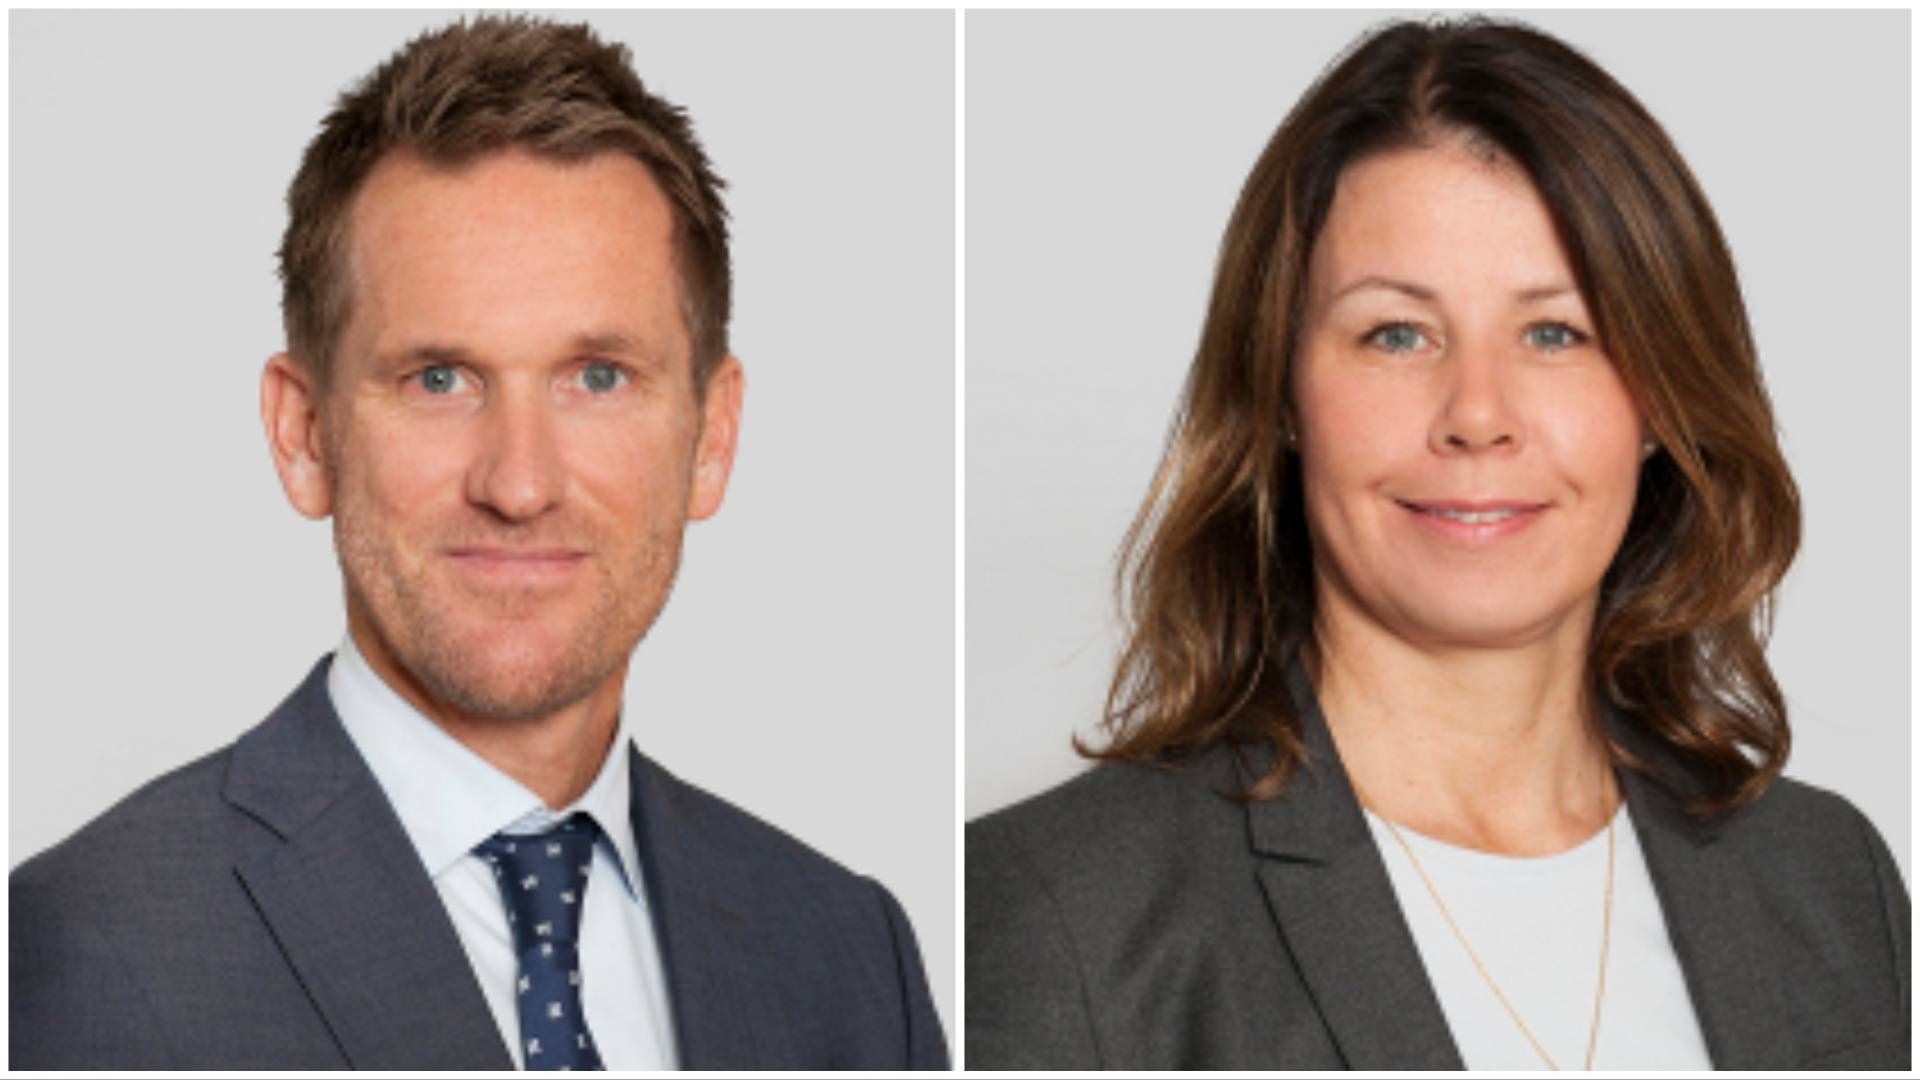 Henrik Emil Høyerholt and Maria Granlund are portfolio managers at Alfred Berg's Nordic high yield fund. | Photo: PR / Alfred Berg